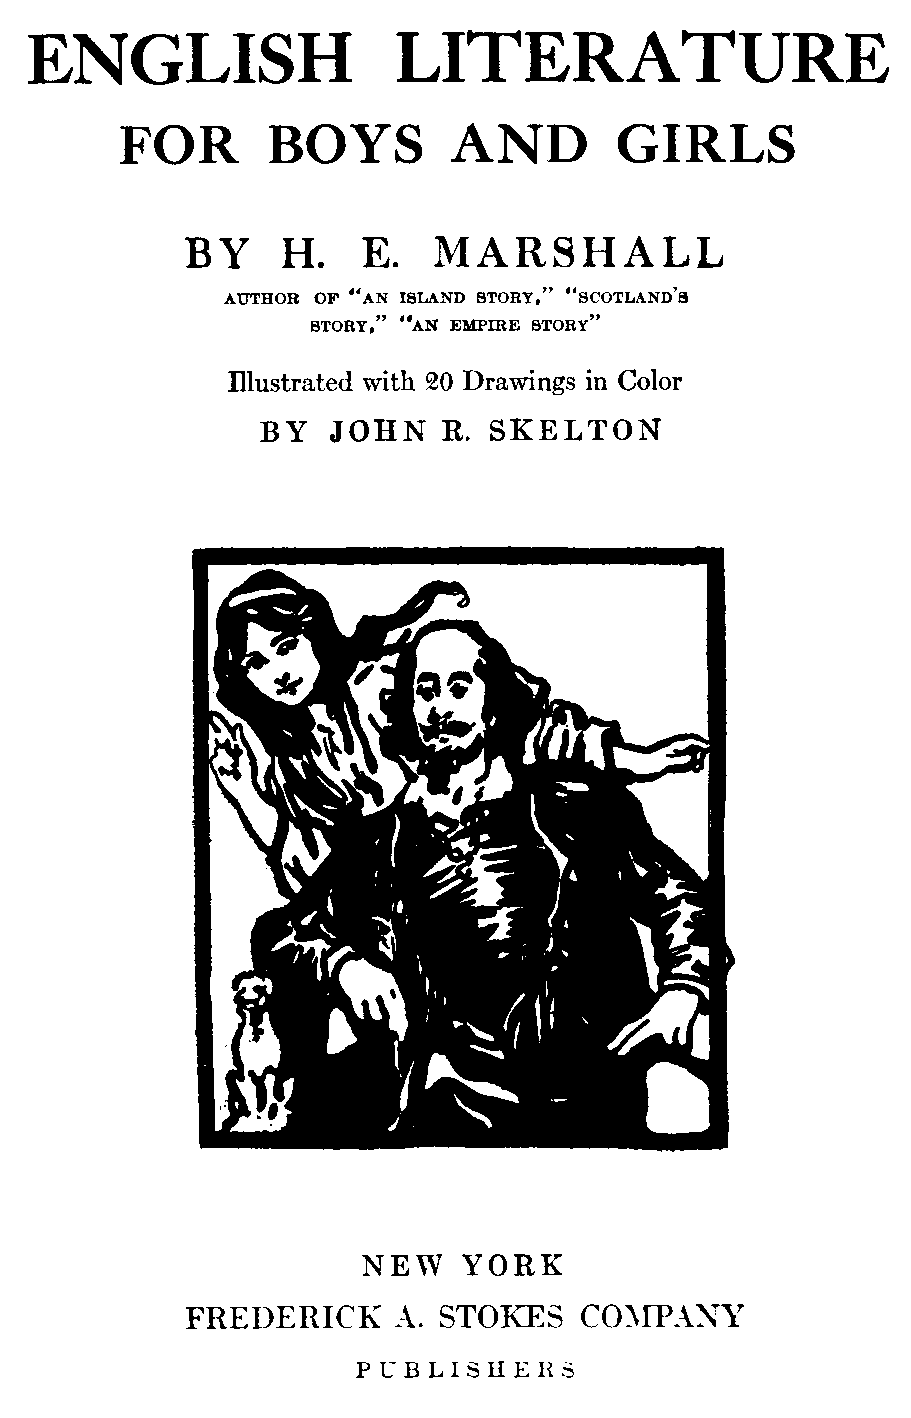 [Titlepage] from English Literature  by H. E. Marshall